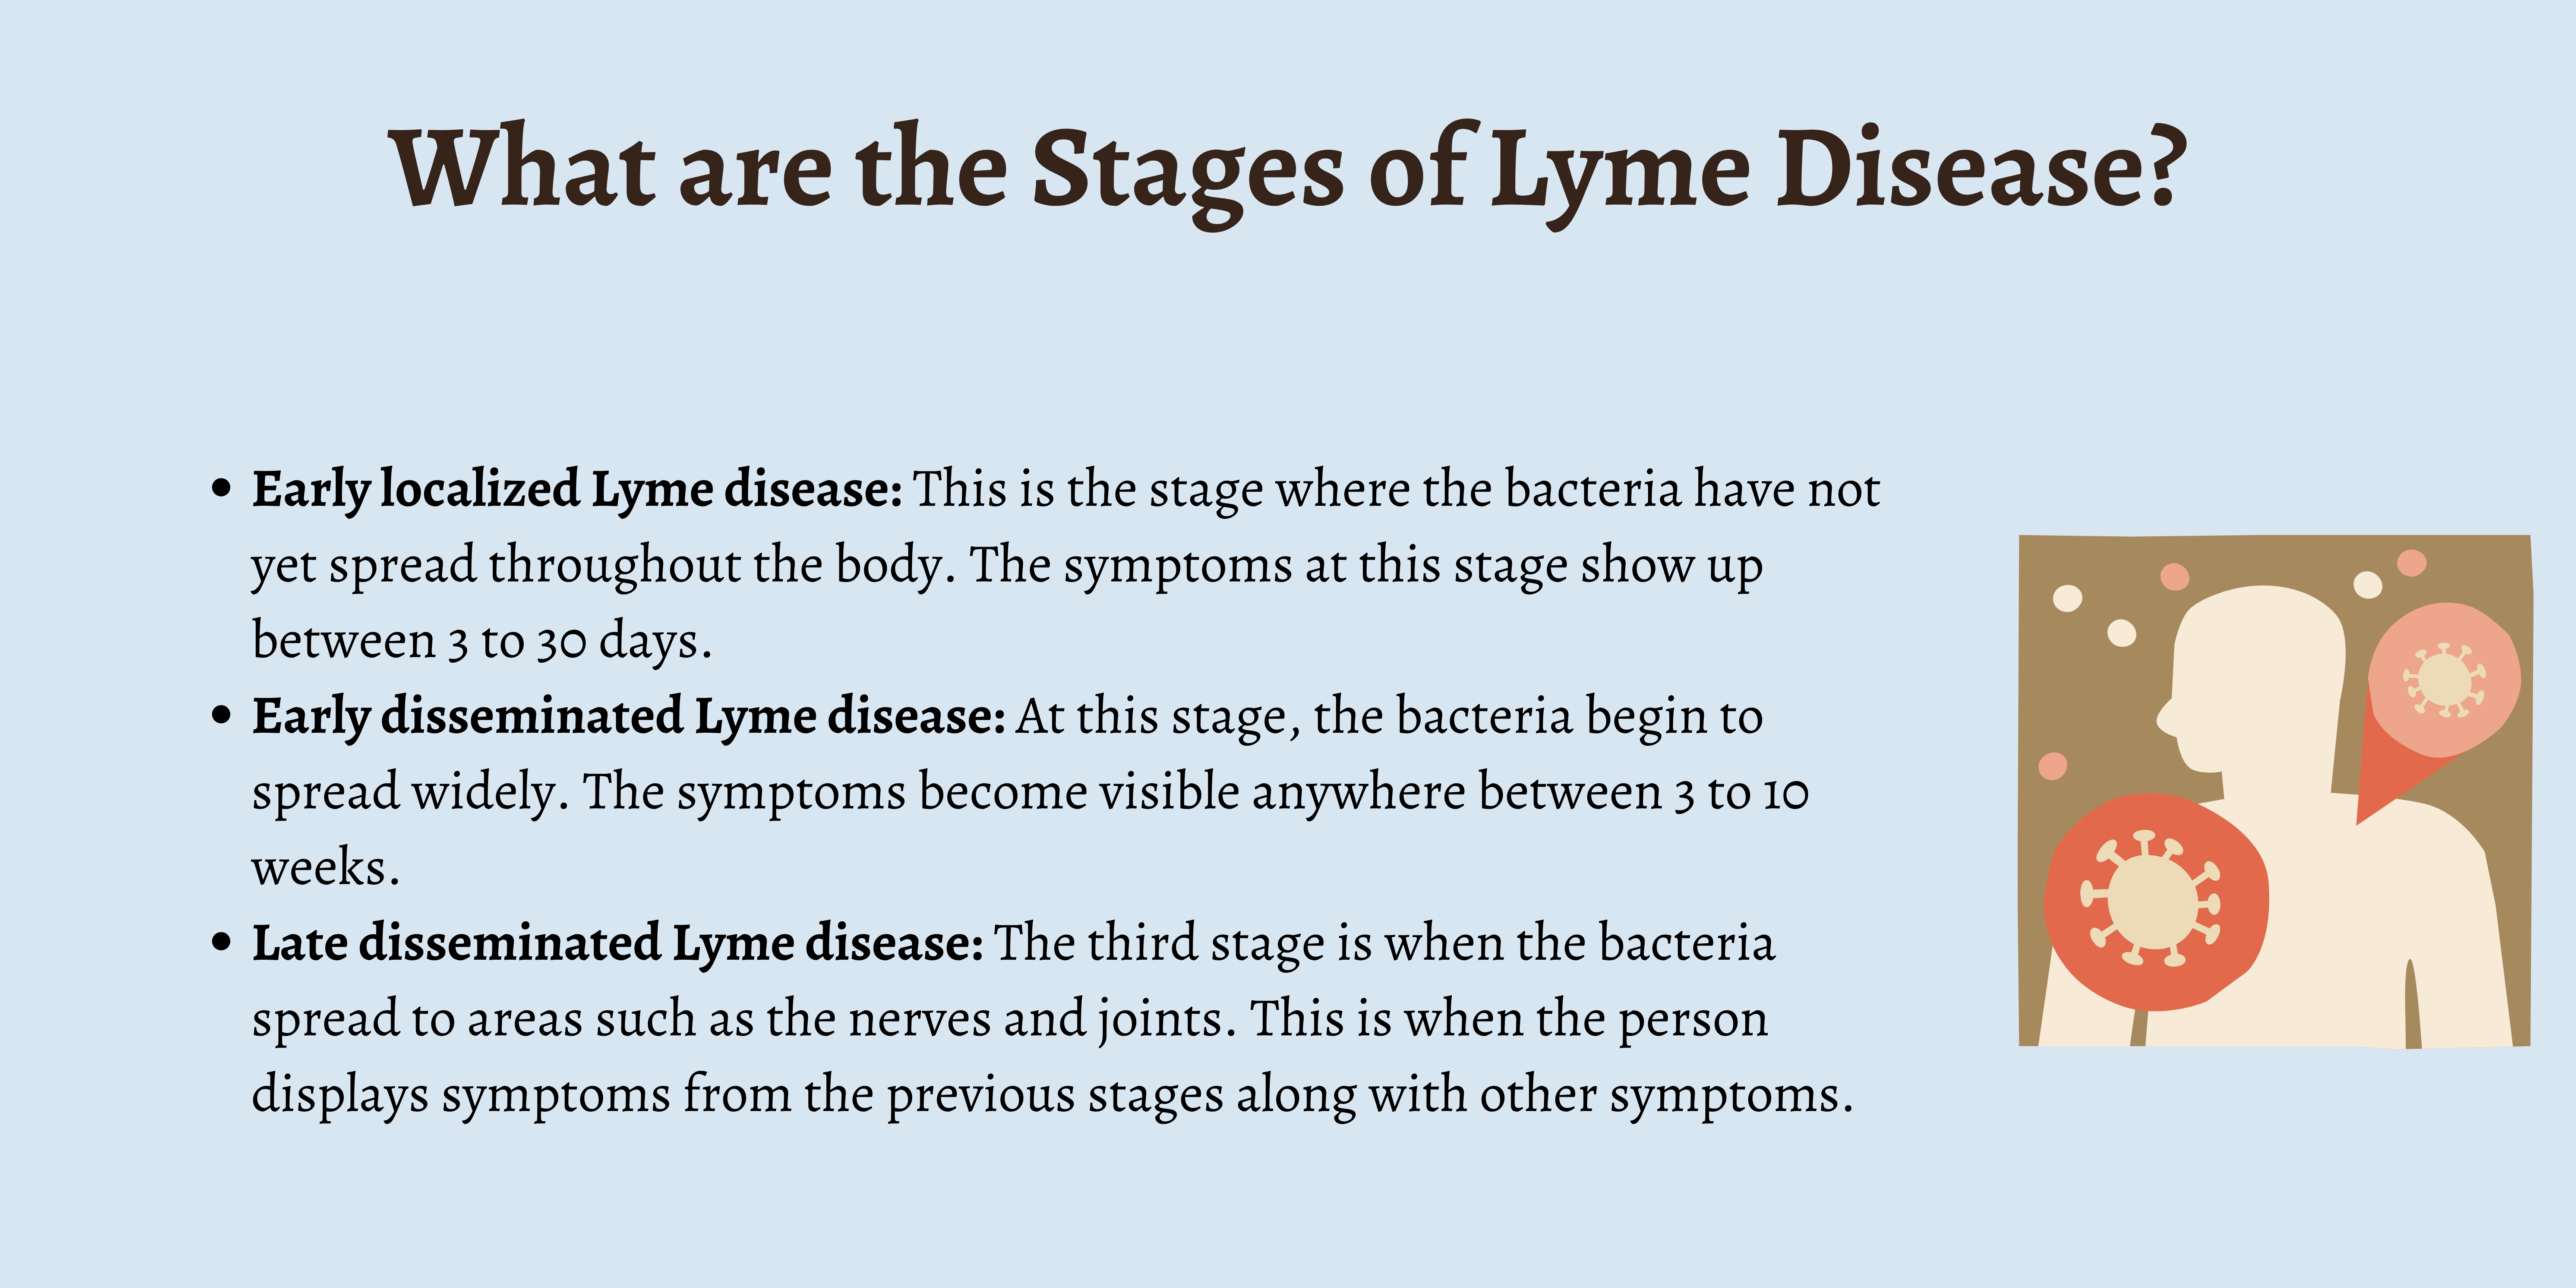 three stages of diseases